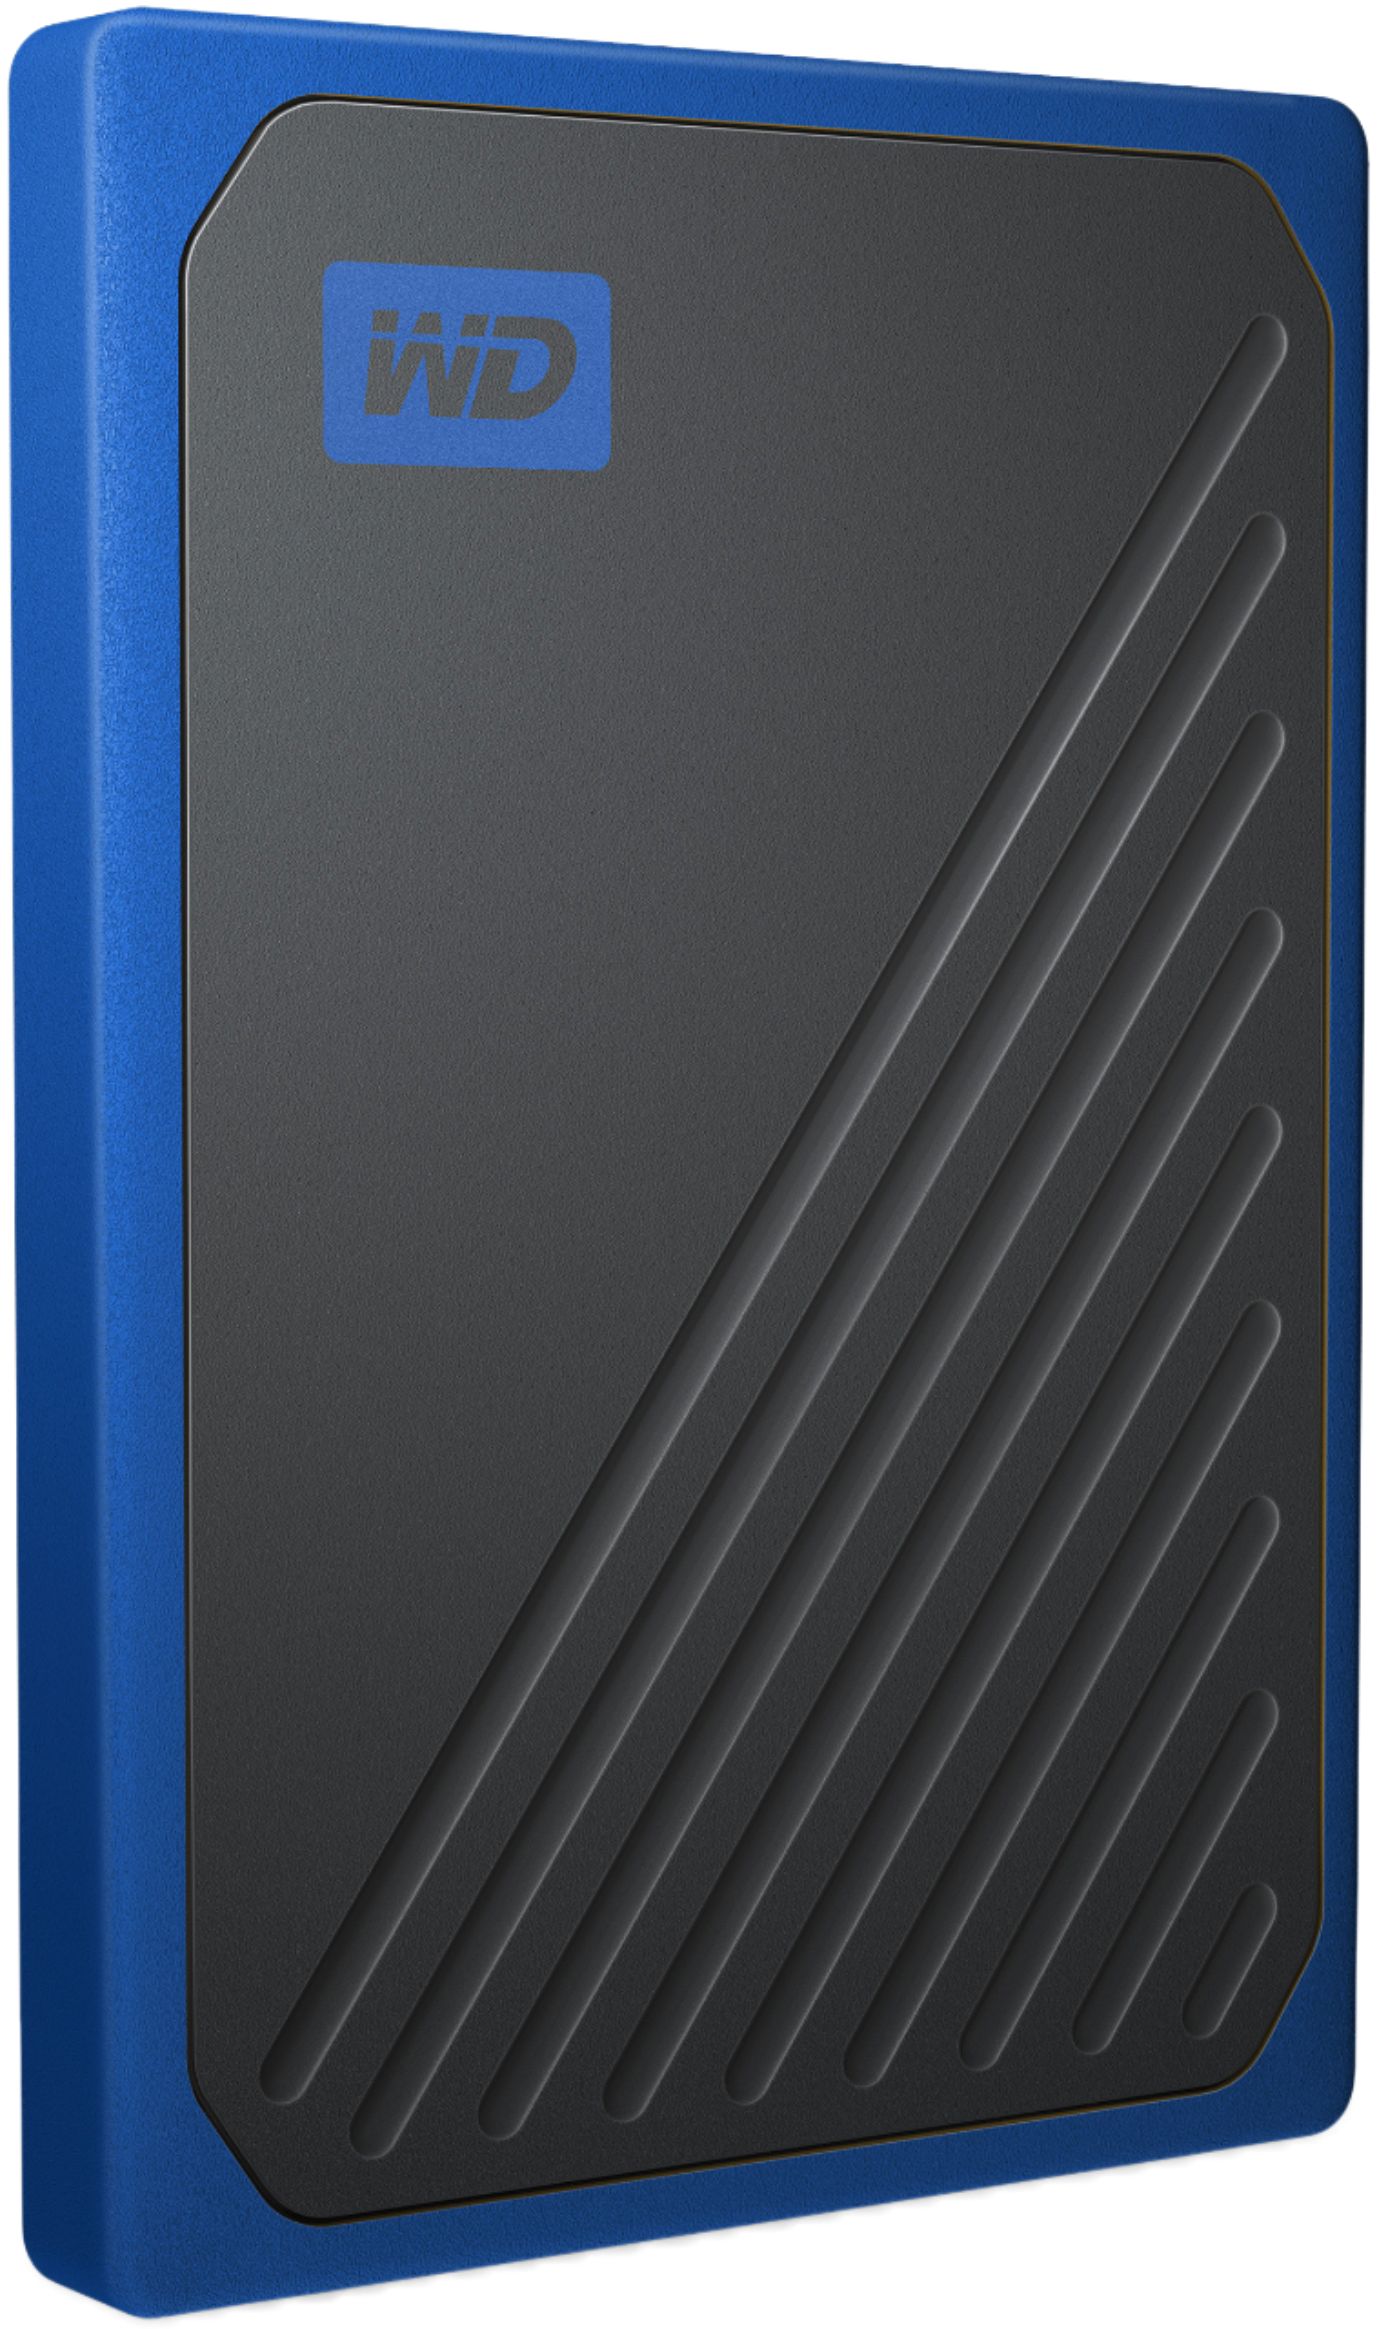 Angle View: PNY - Pro Elite 500GB USB 3.1 Gen 2 Type-C Portable Solid State Drive (SSD)